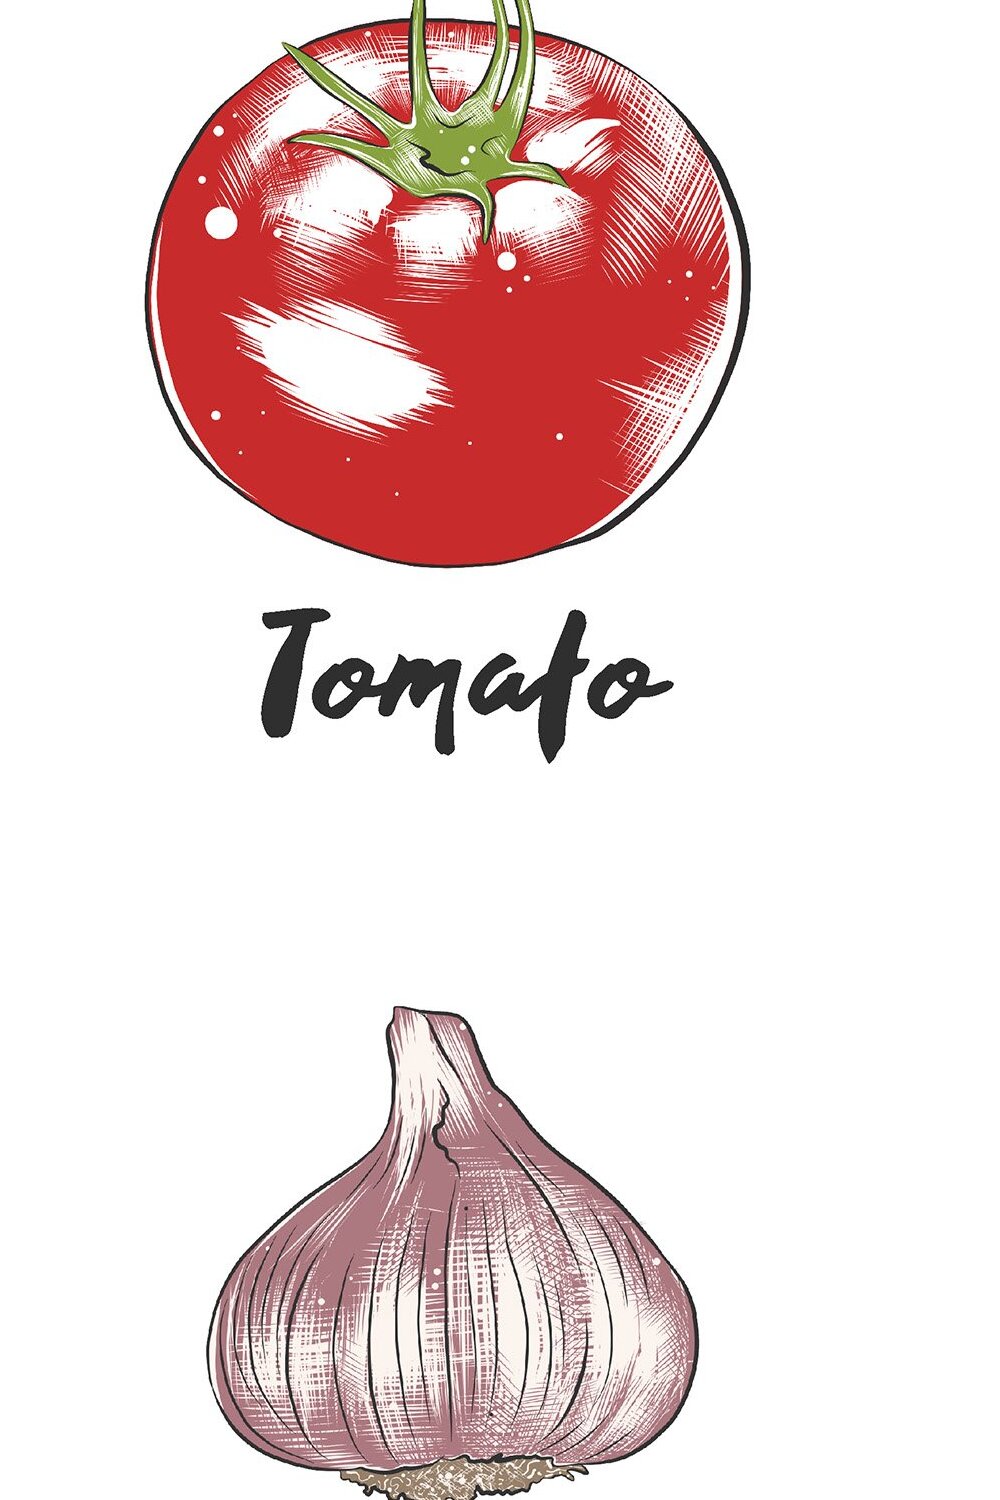 A drawing of a tomato and a garlic.